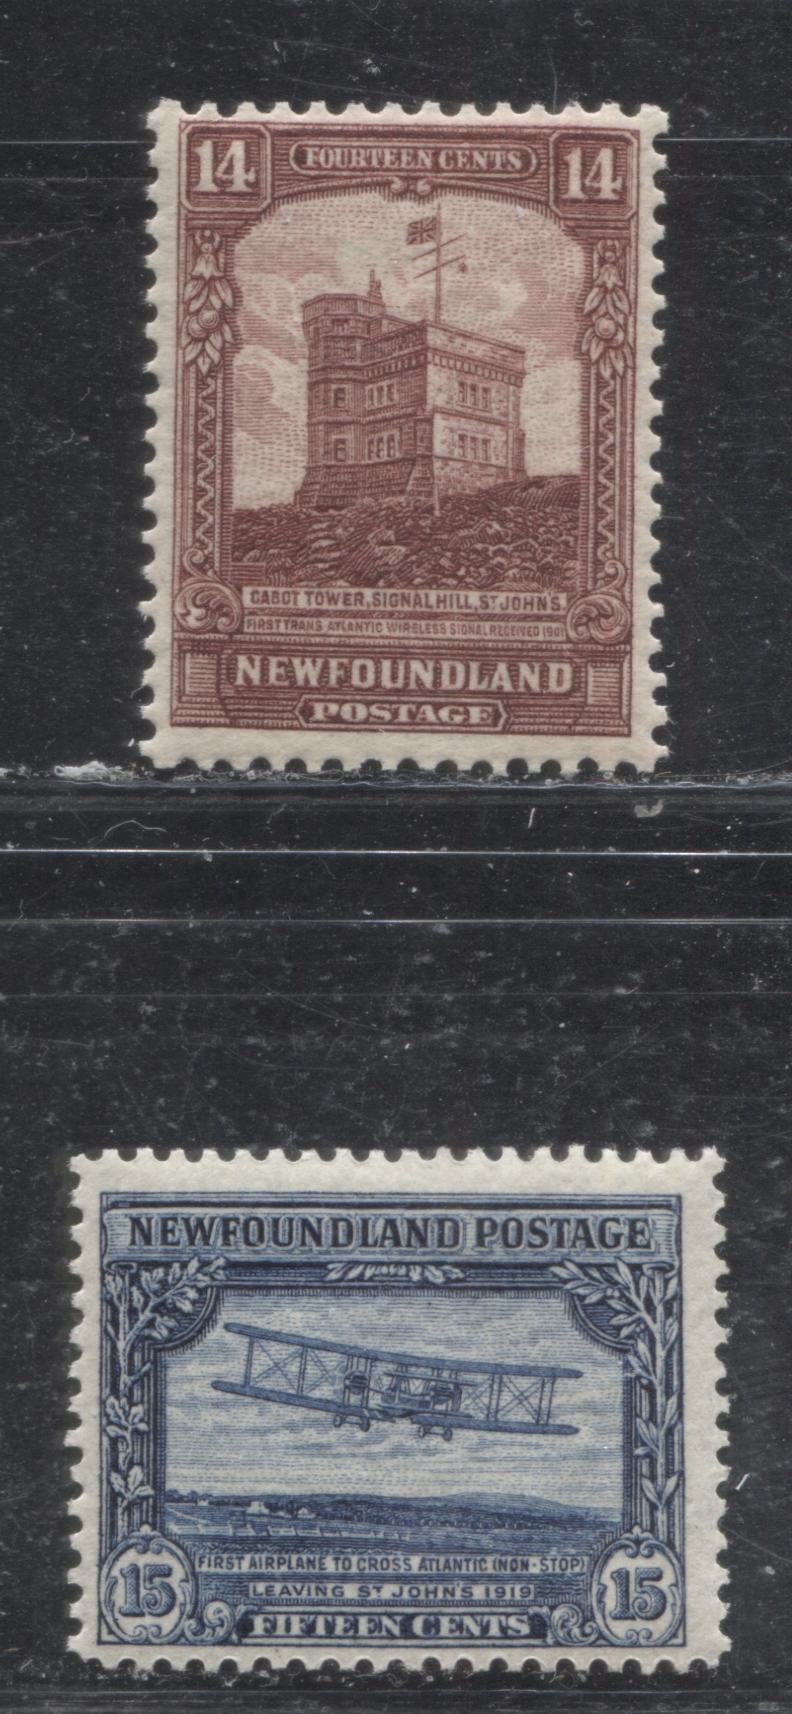 Lot 73 Newfoundland # 155-156 14c & 15c Maroon & Dark Blue Cabot Tower& Airplane Crossing Atlantic, 1928-1929 Publicity Issue, Two Fine NH Examples, Comb Perf. 12.9 x 13.7 and Line Perf. 14.1 x 13.8